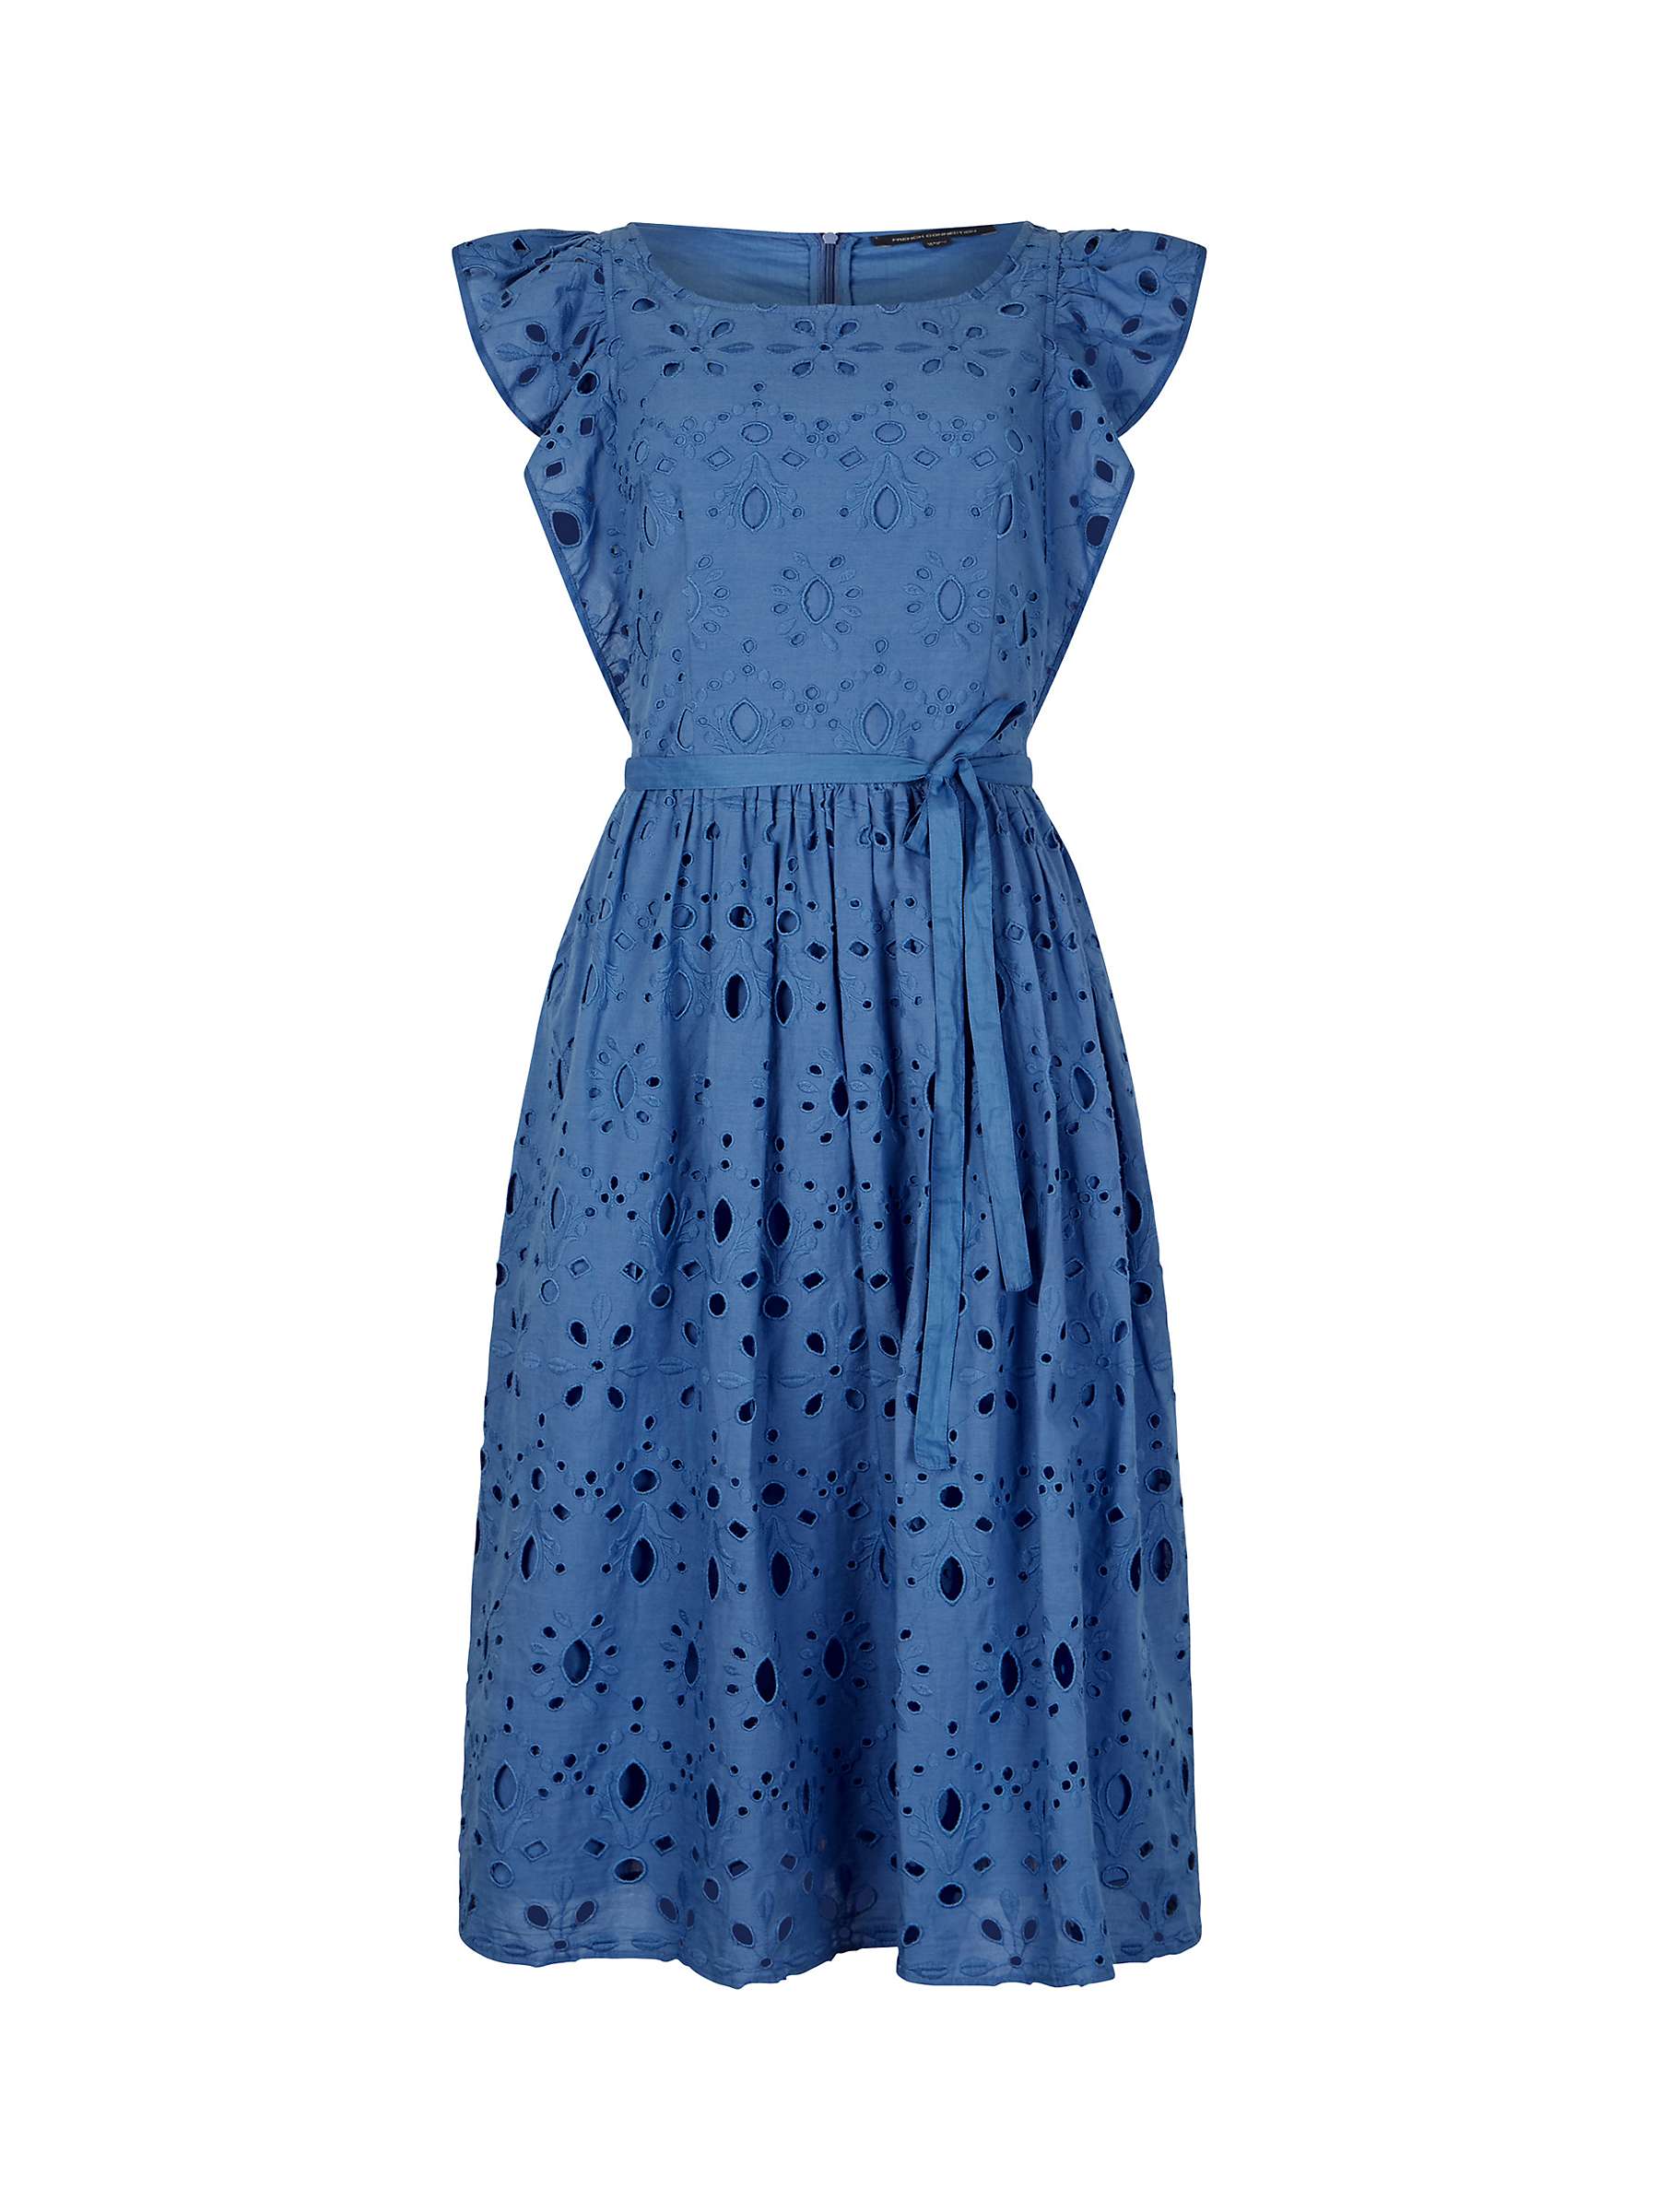 French Connection Cilla Broderie Anglaise Dress, Baja Blue at John ...